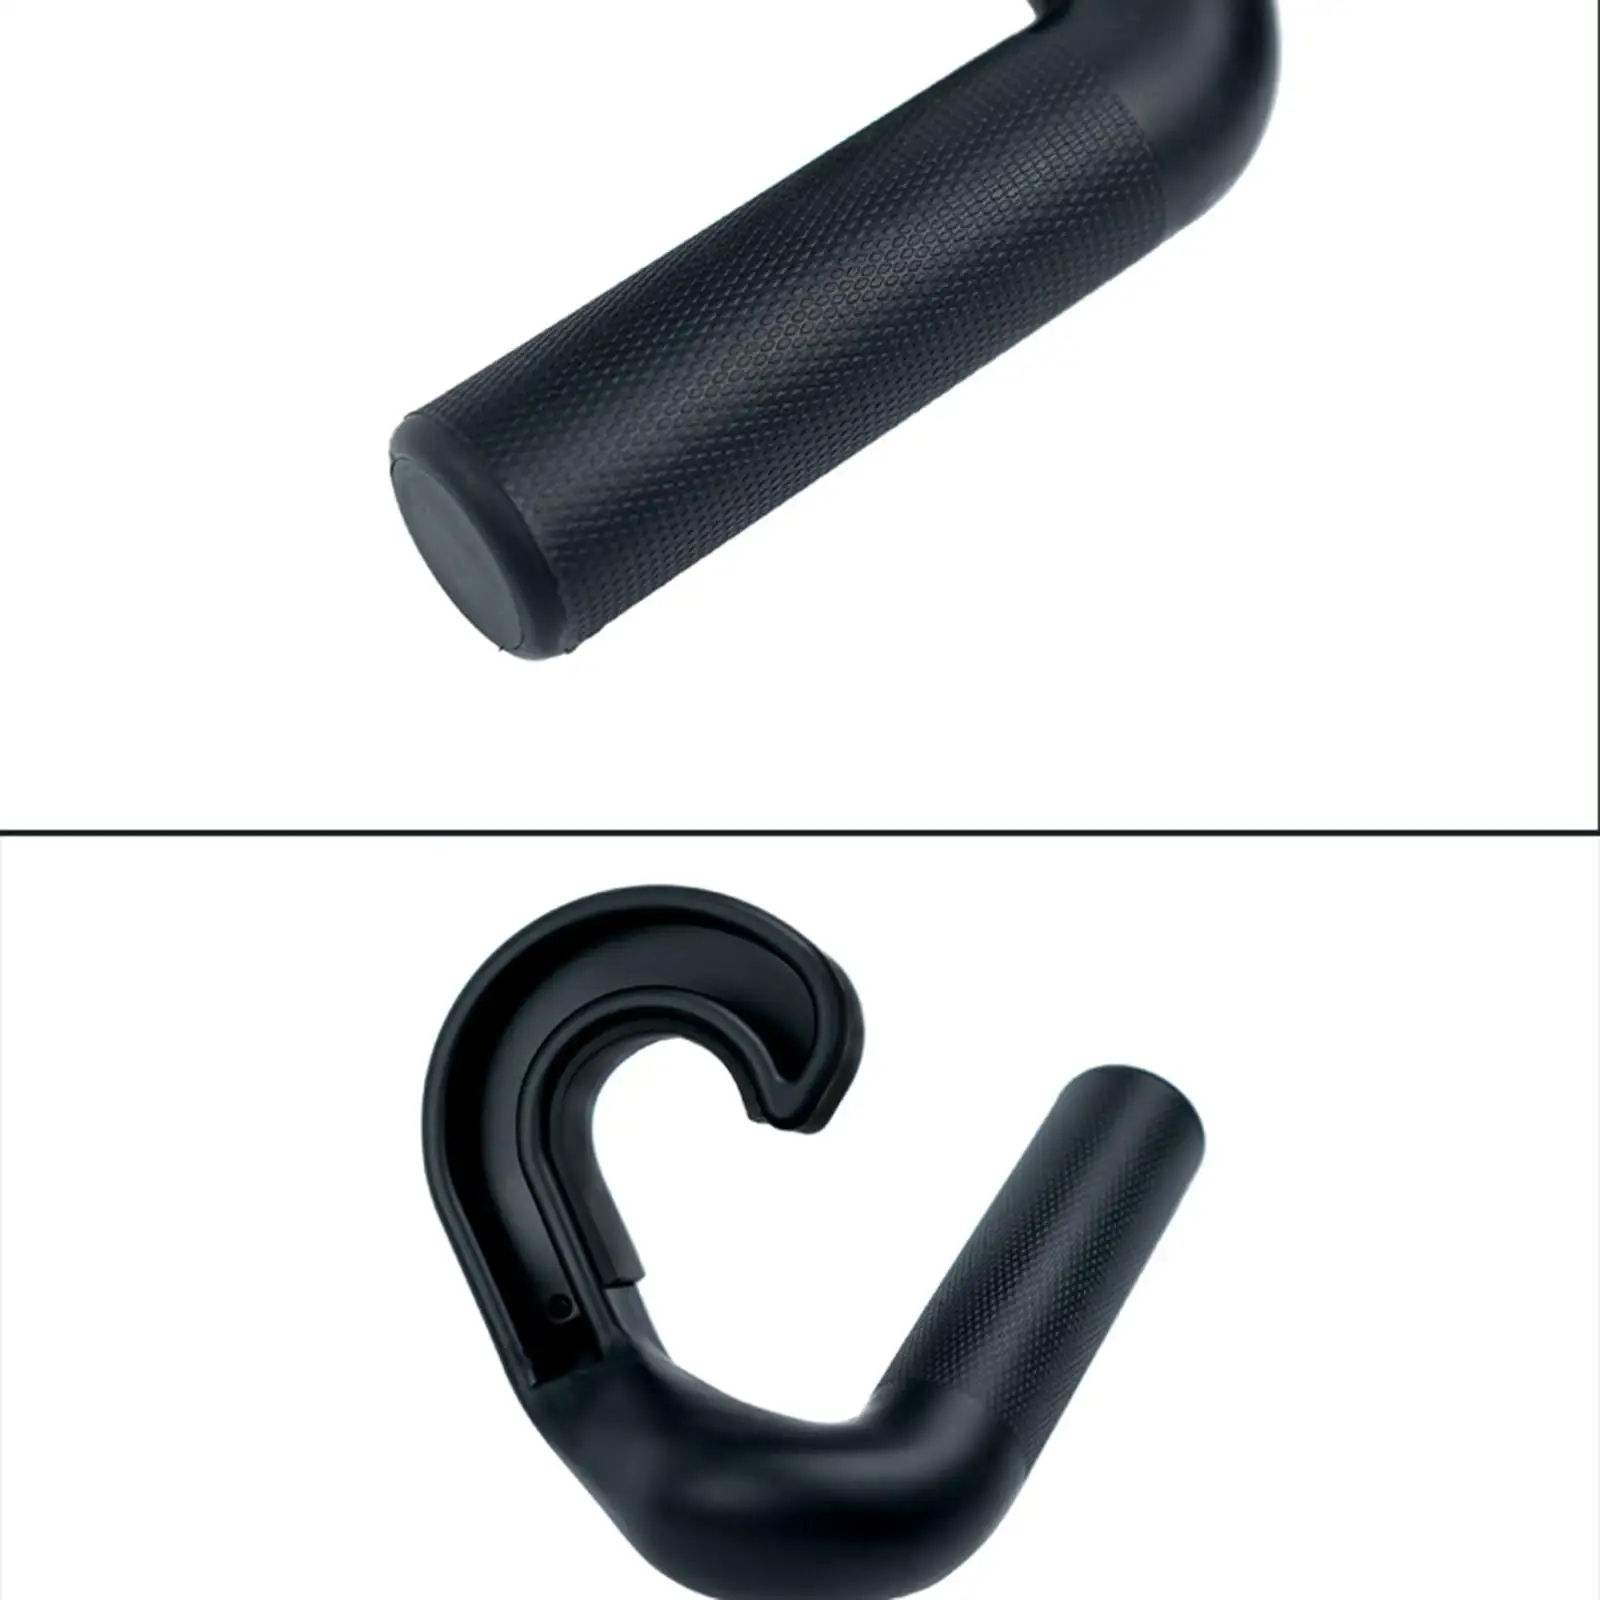 2x Grip Handle Attachment Non Slip Weightlifting Grips Cable Machine Handles for